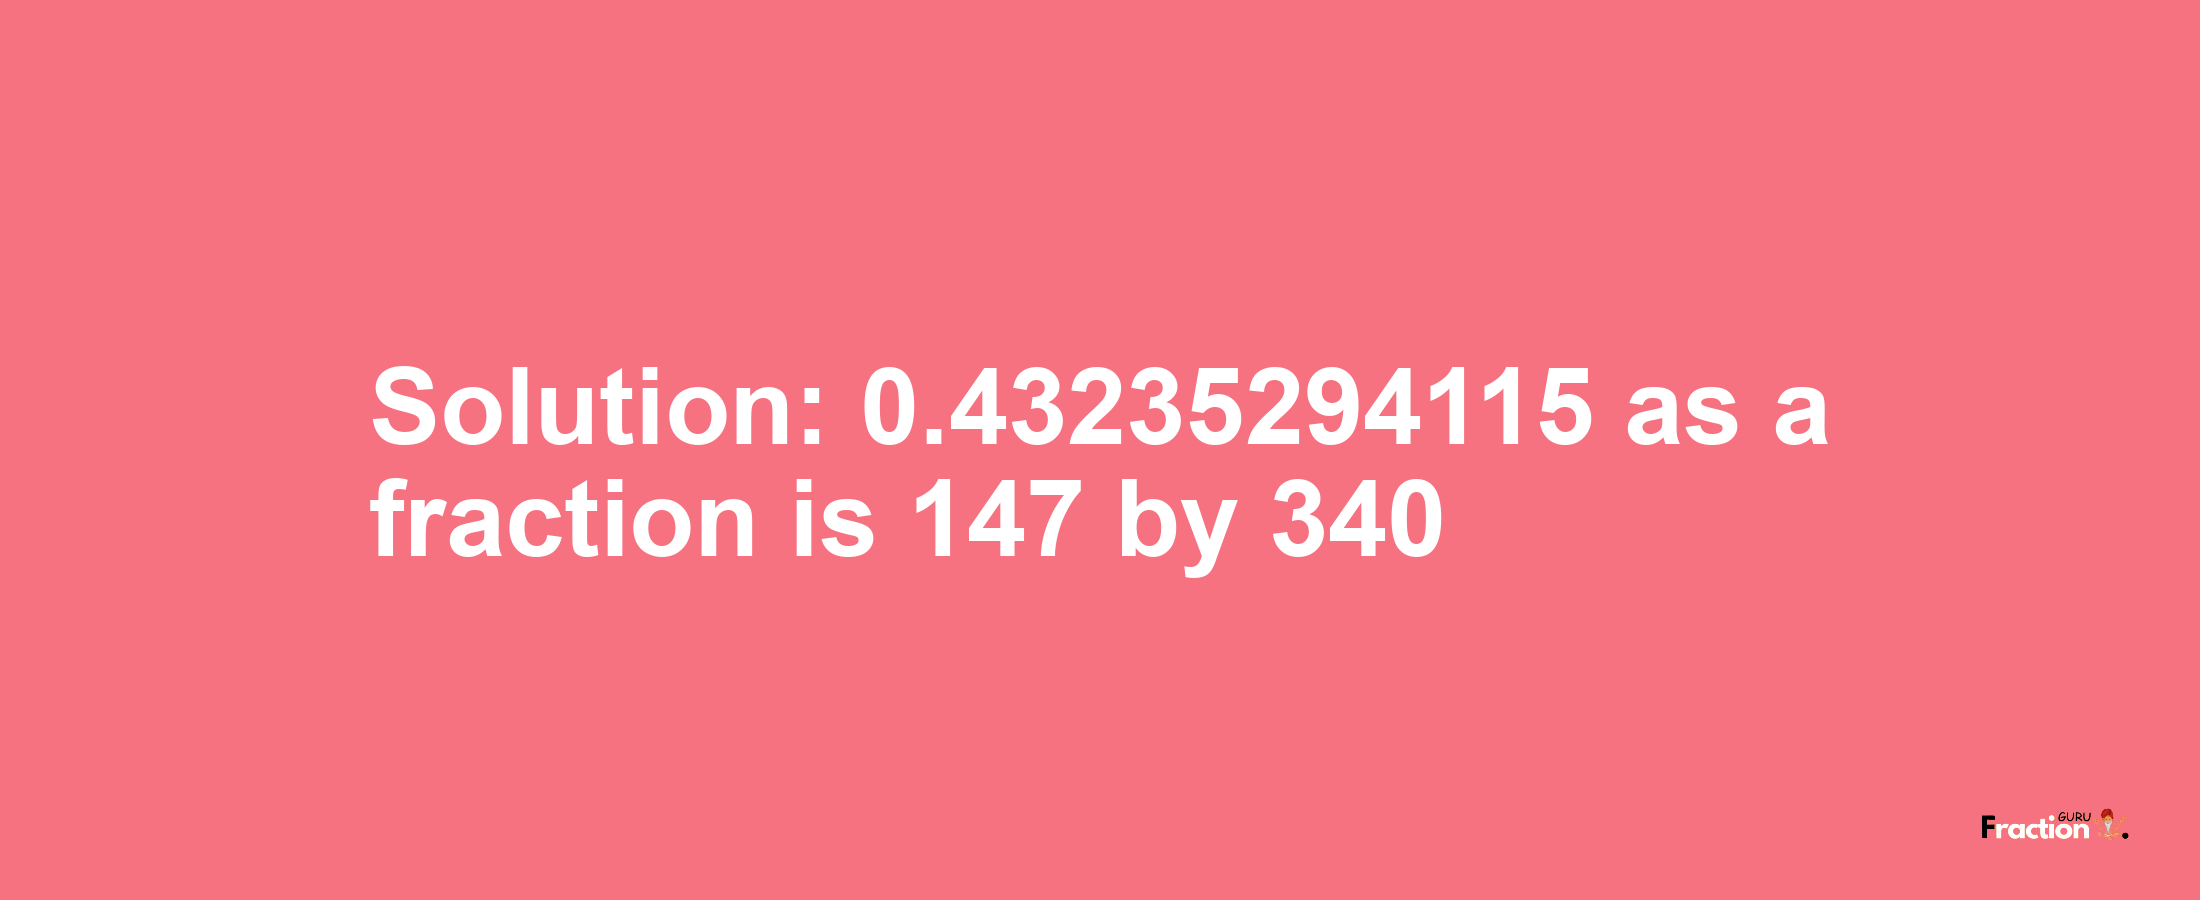 Solution:0.43235294115 as a fraction is 147/340